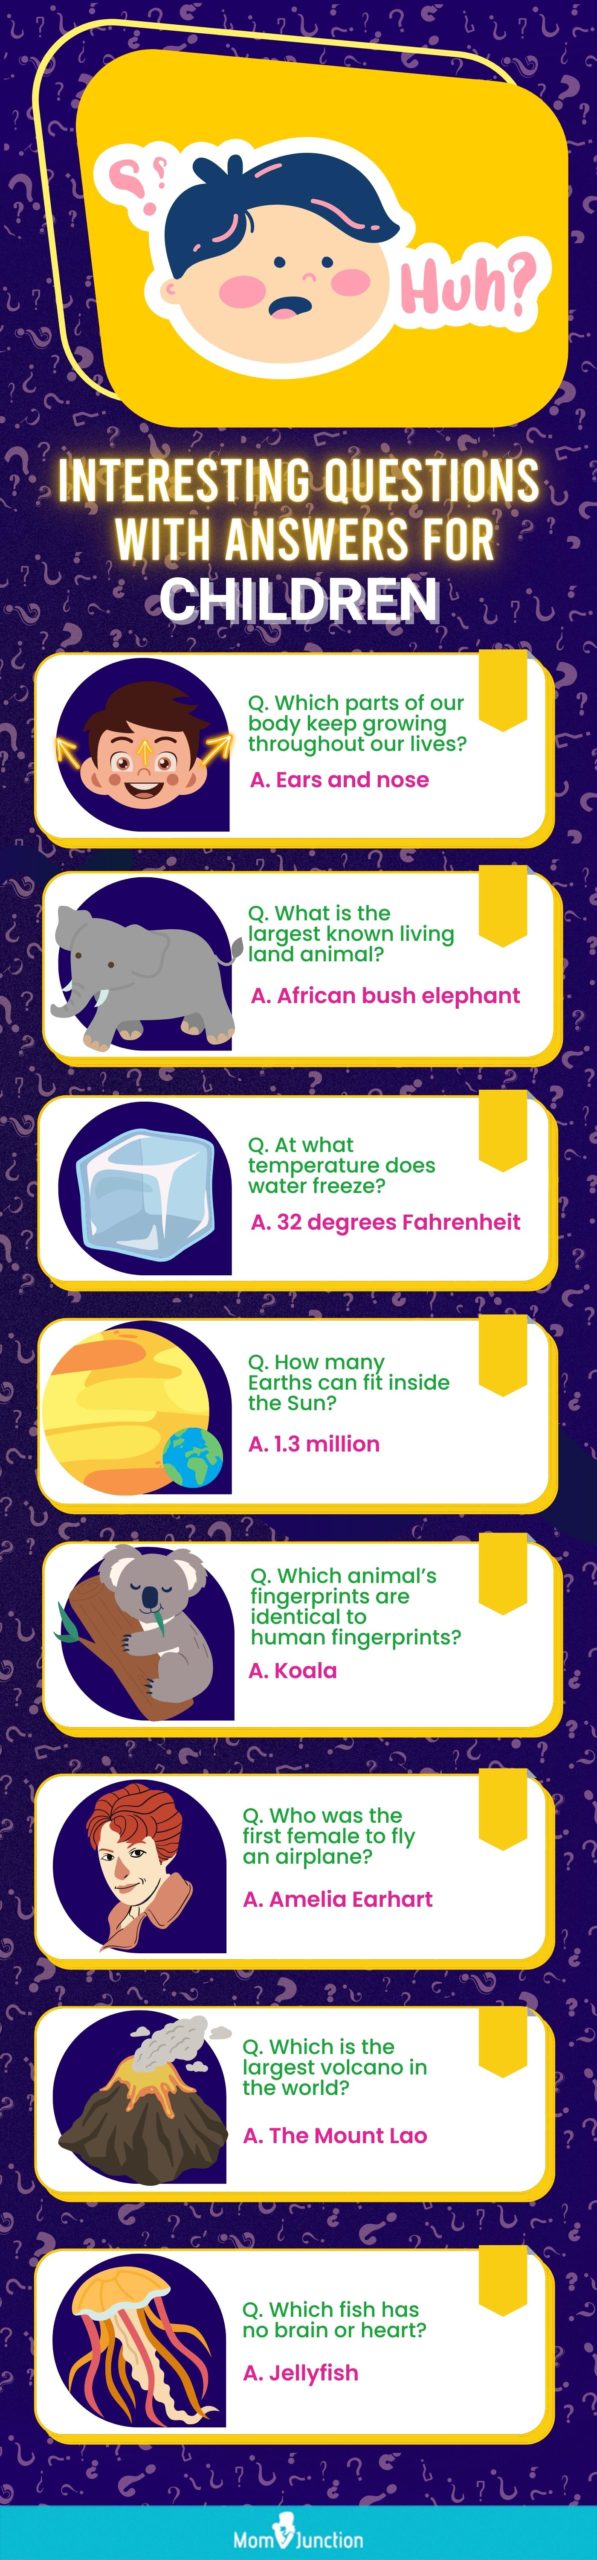 interesting questions with answers for children (infographic)